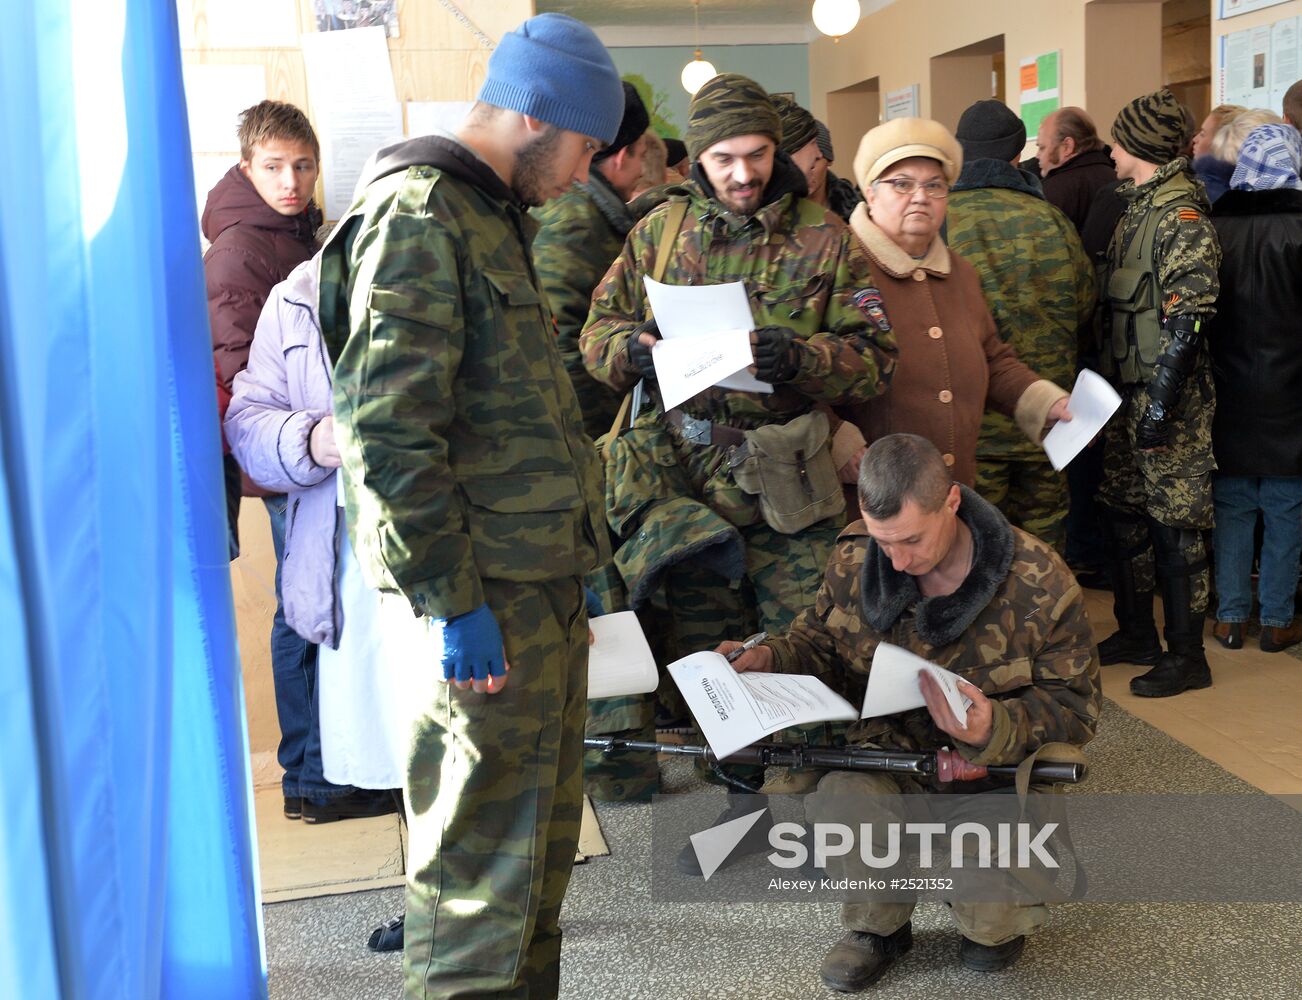 Elections for regional leader and parliament in Donetsk People's Republic